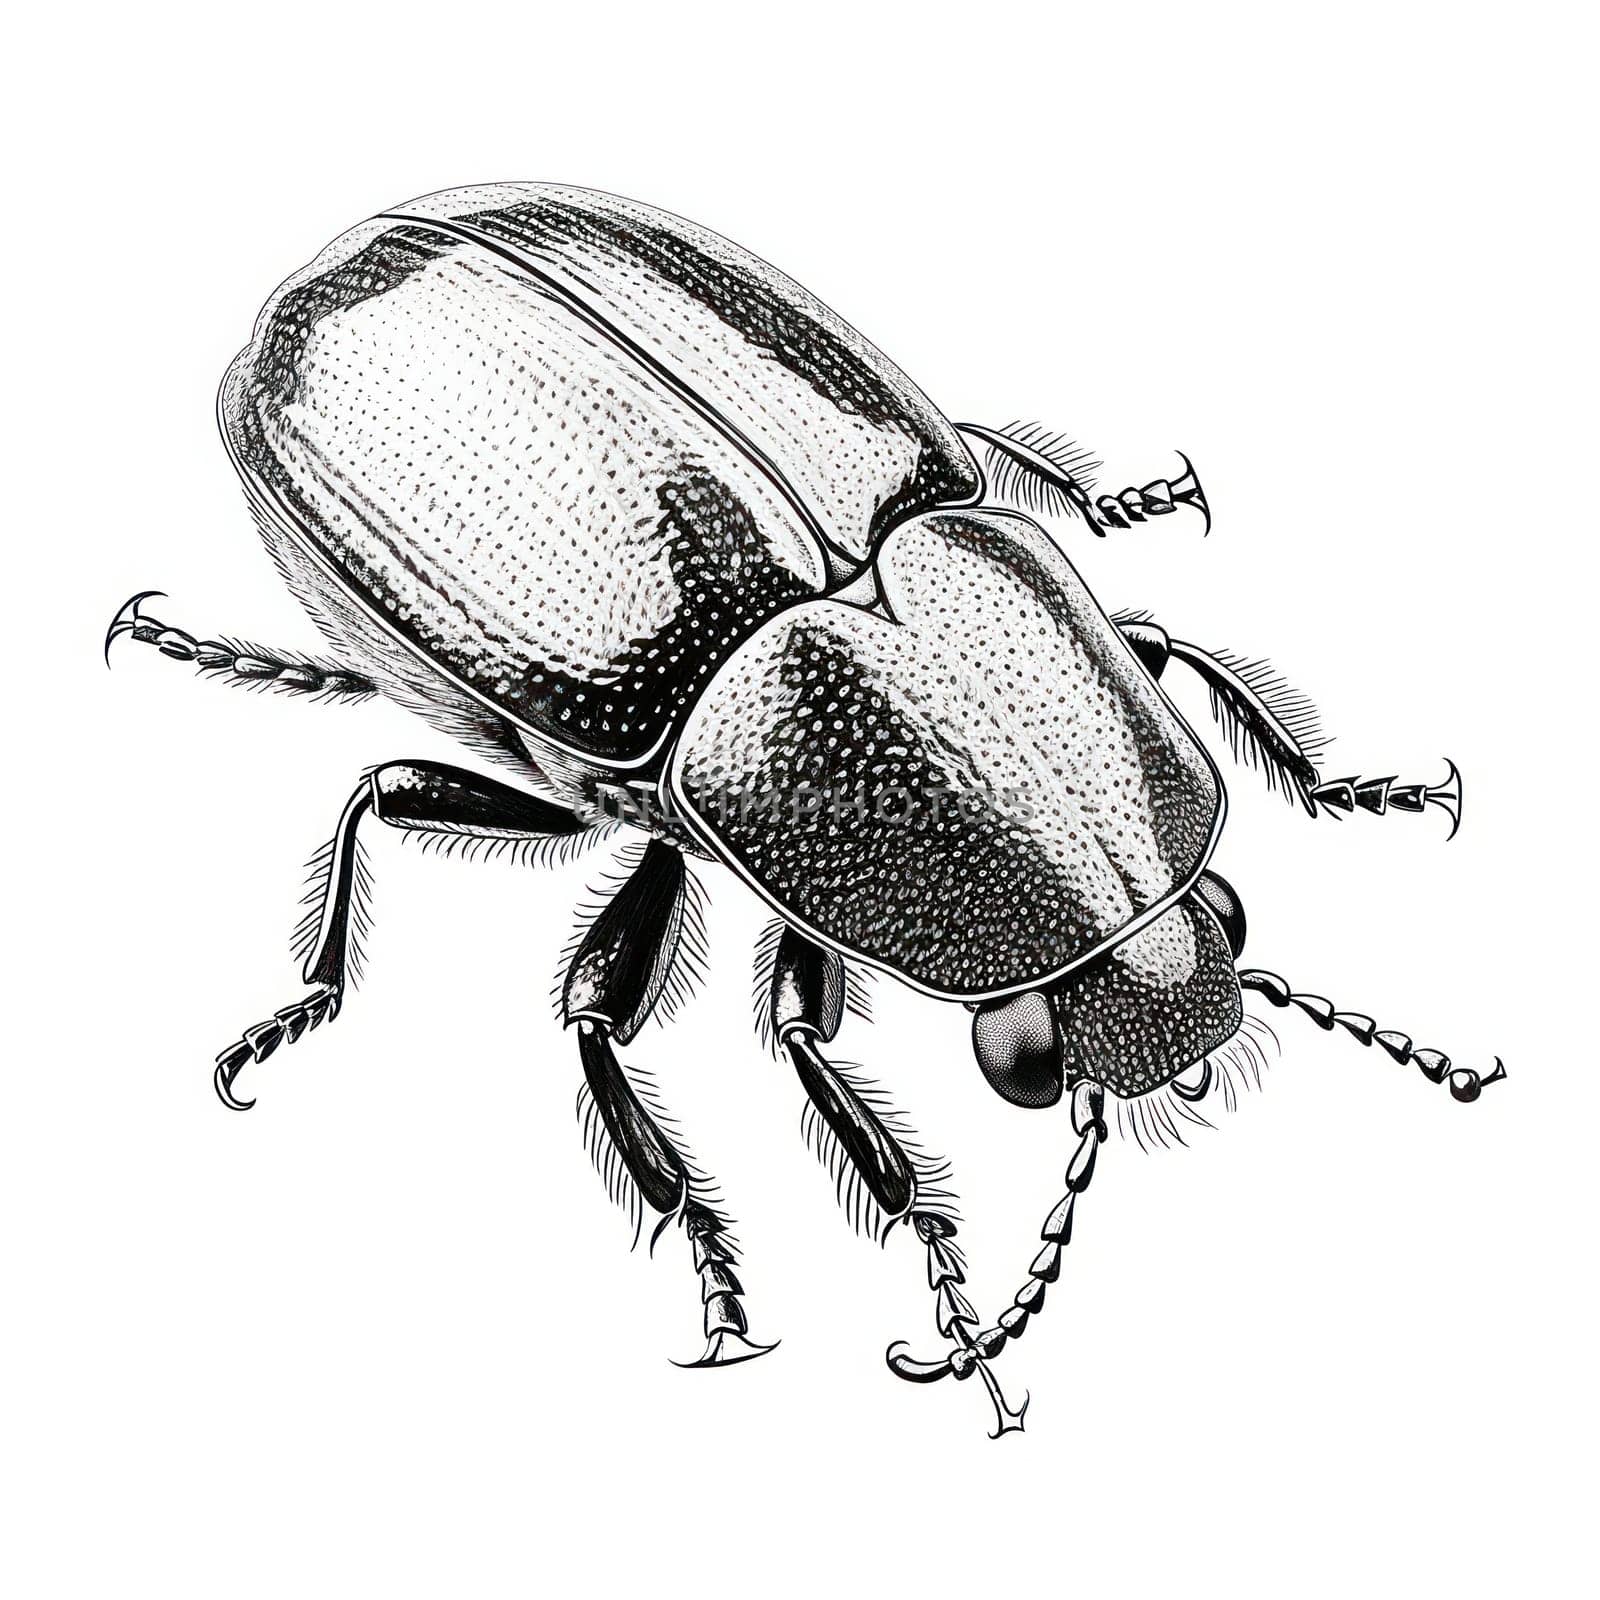 Isolated White Beetle: An Intricate Illustration of a Small, Predatory Insect with Elegant Antennae on a Vintage Engraving-Style Background by Vichizh